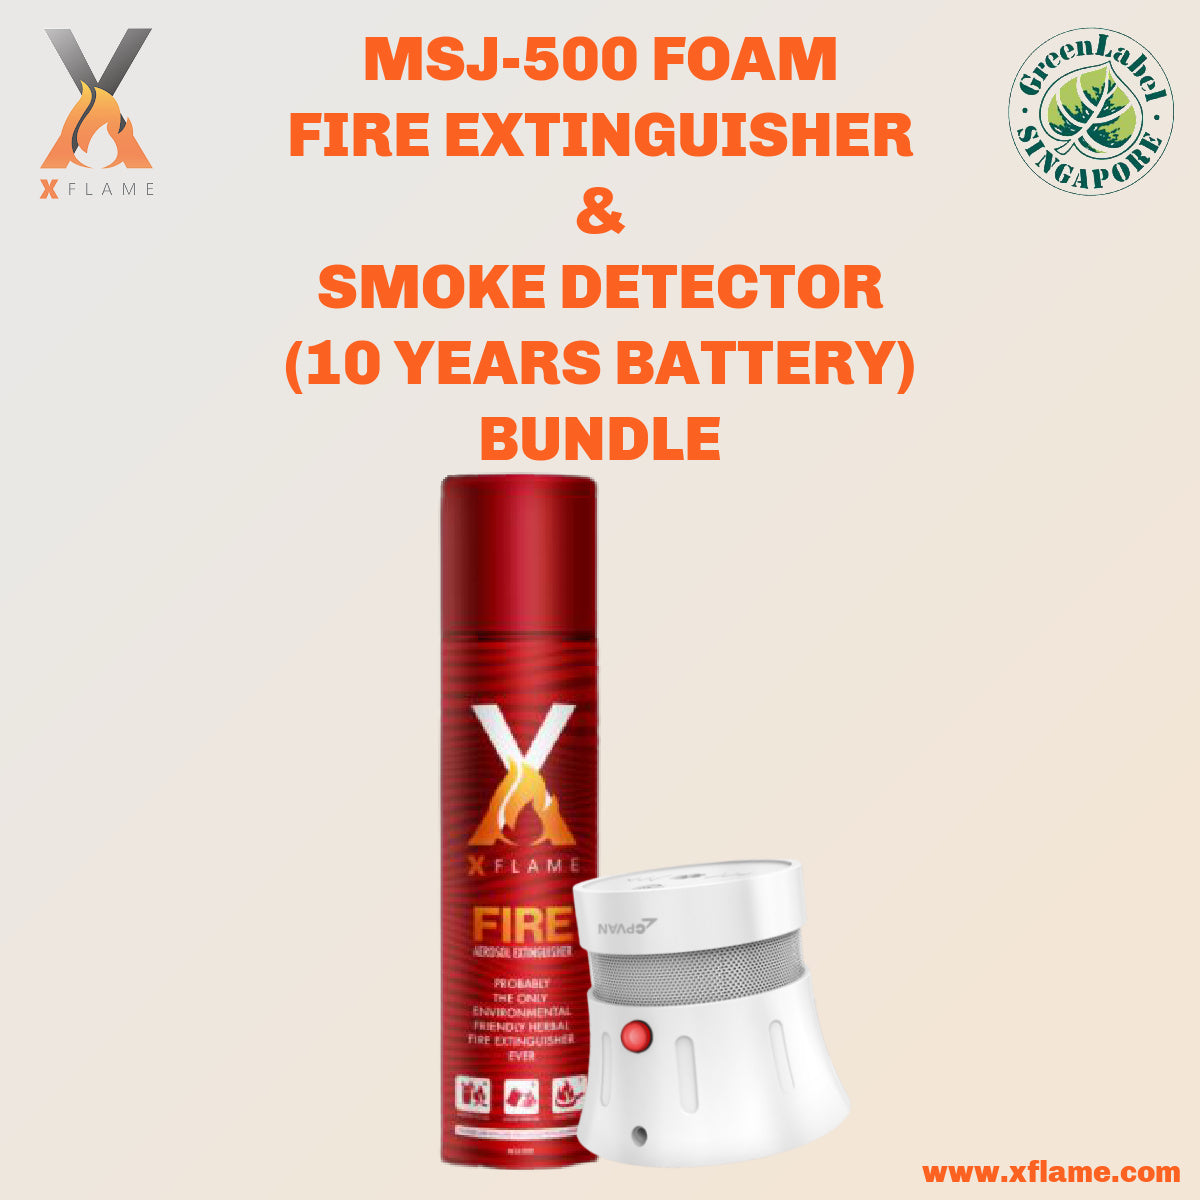 XFLAME MSJ-500 Fire Extinguisher with Smoke Detector